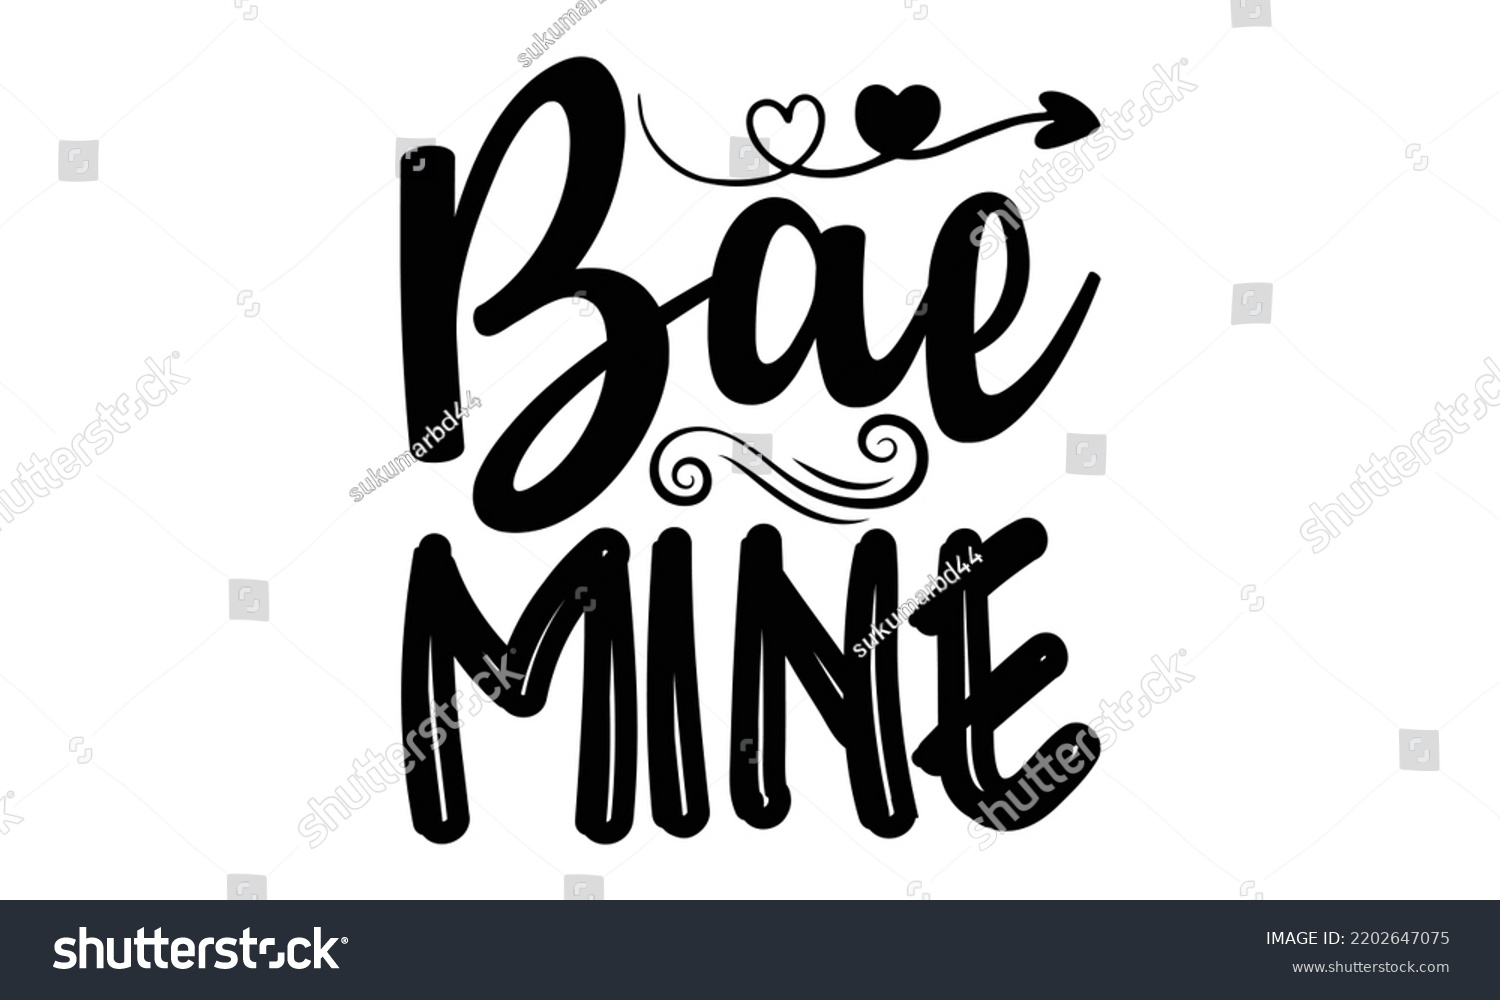 SVG of Bae Mine - Valentine's Day 2023 quotes svg design, Hand drawn vintage hand lettering, This illustration can be used as a print on t-shirts and bags, stationary or as a poster. svg